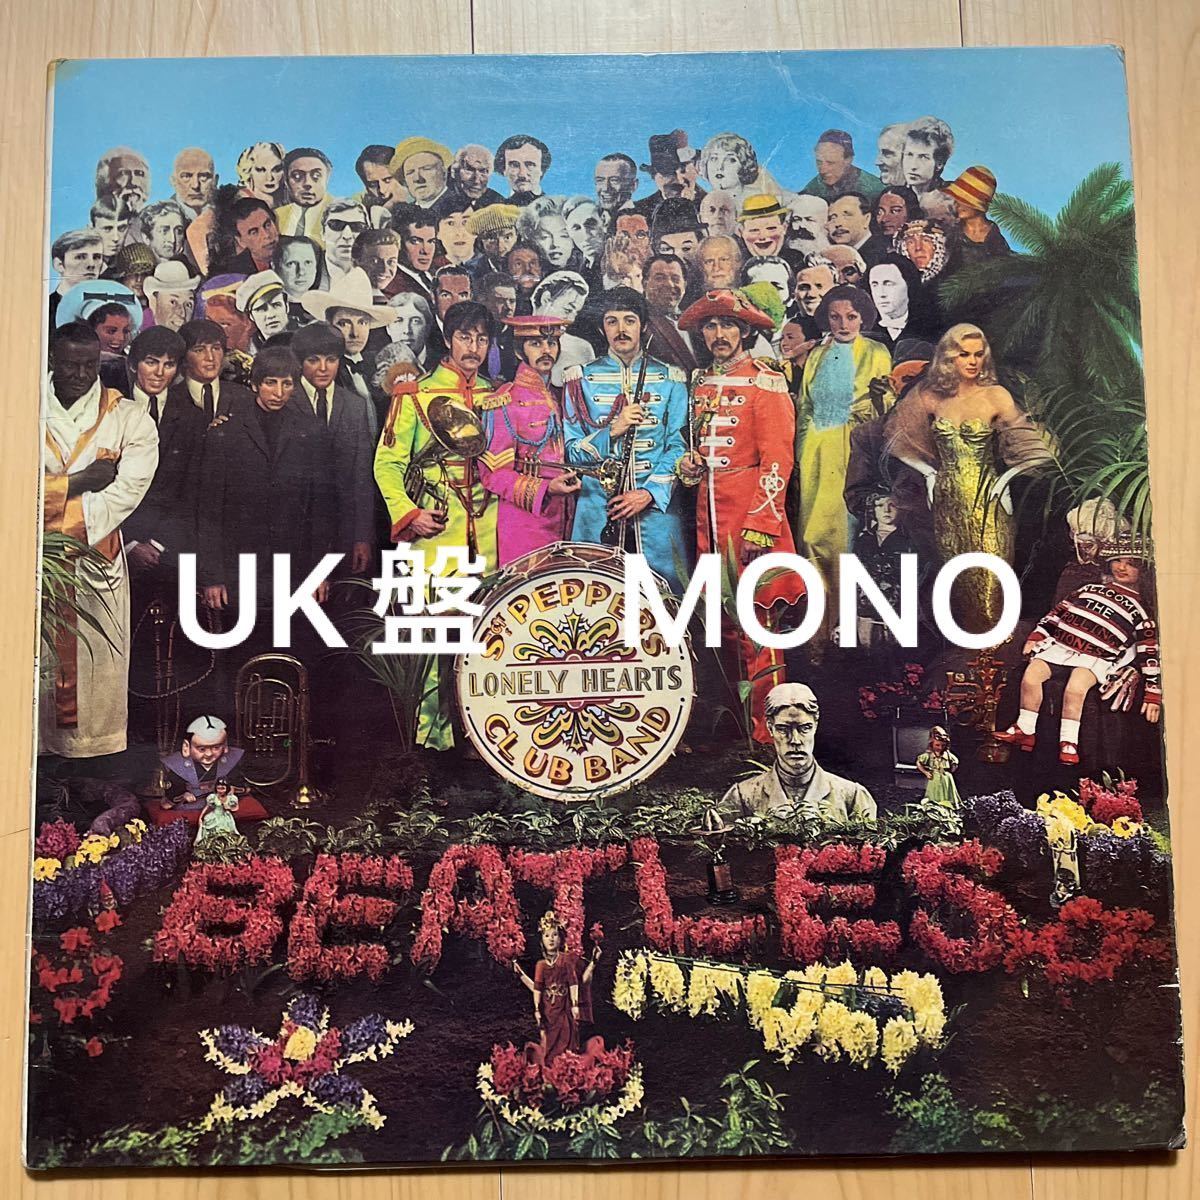 The Beatles『Sgt. Pepper's Lonely Hearts Club Band』UK盤 MONO